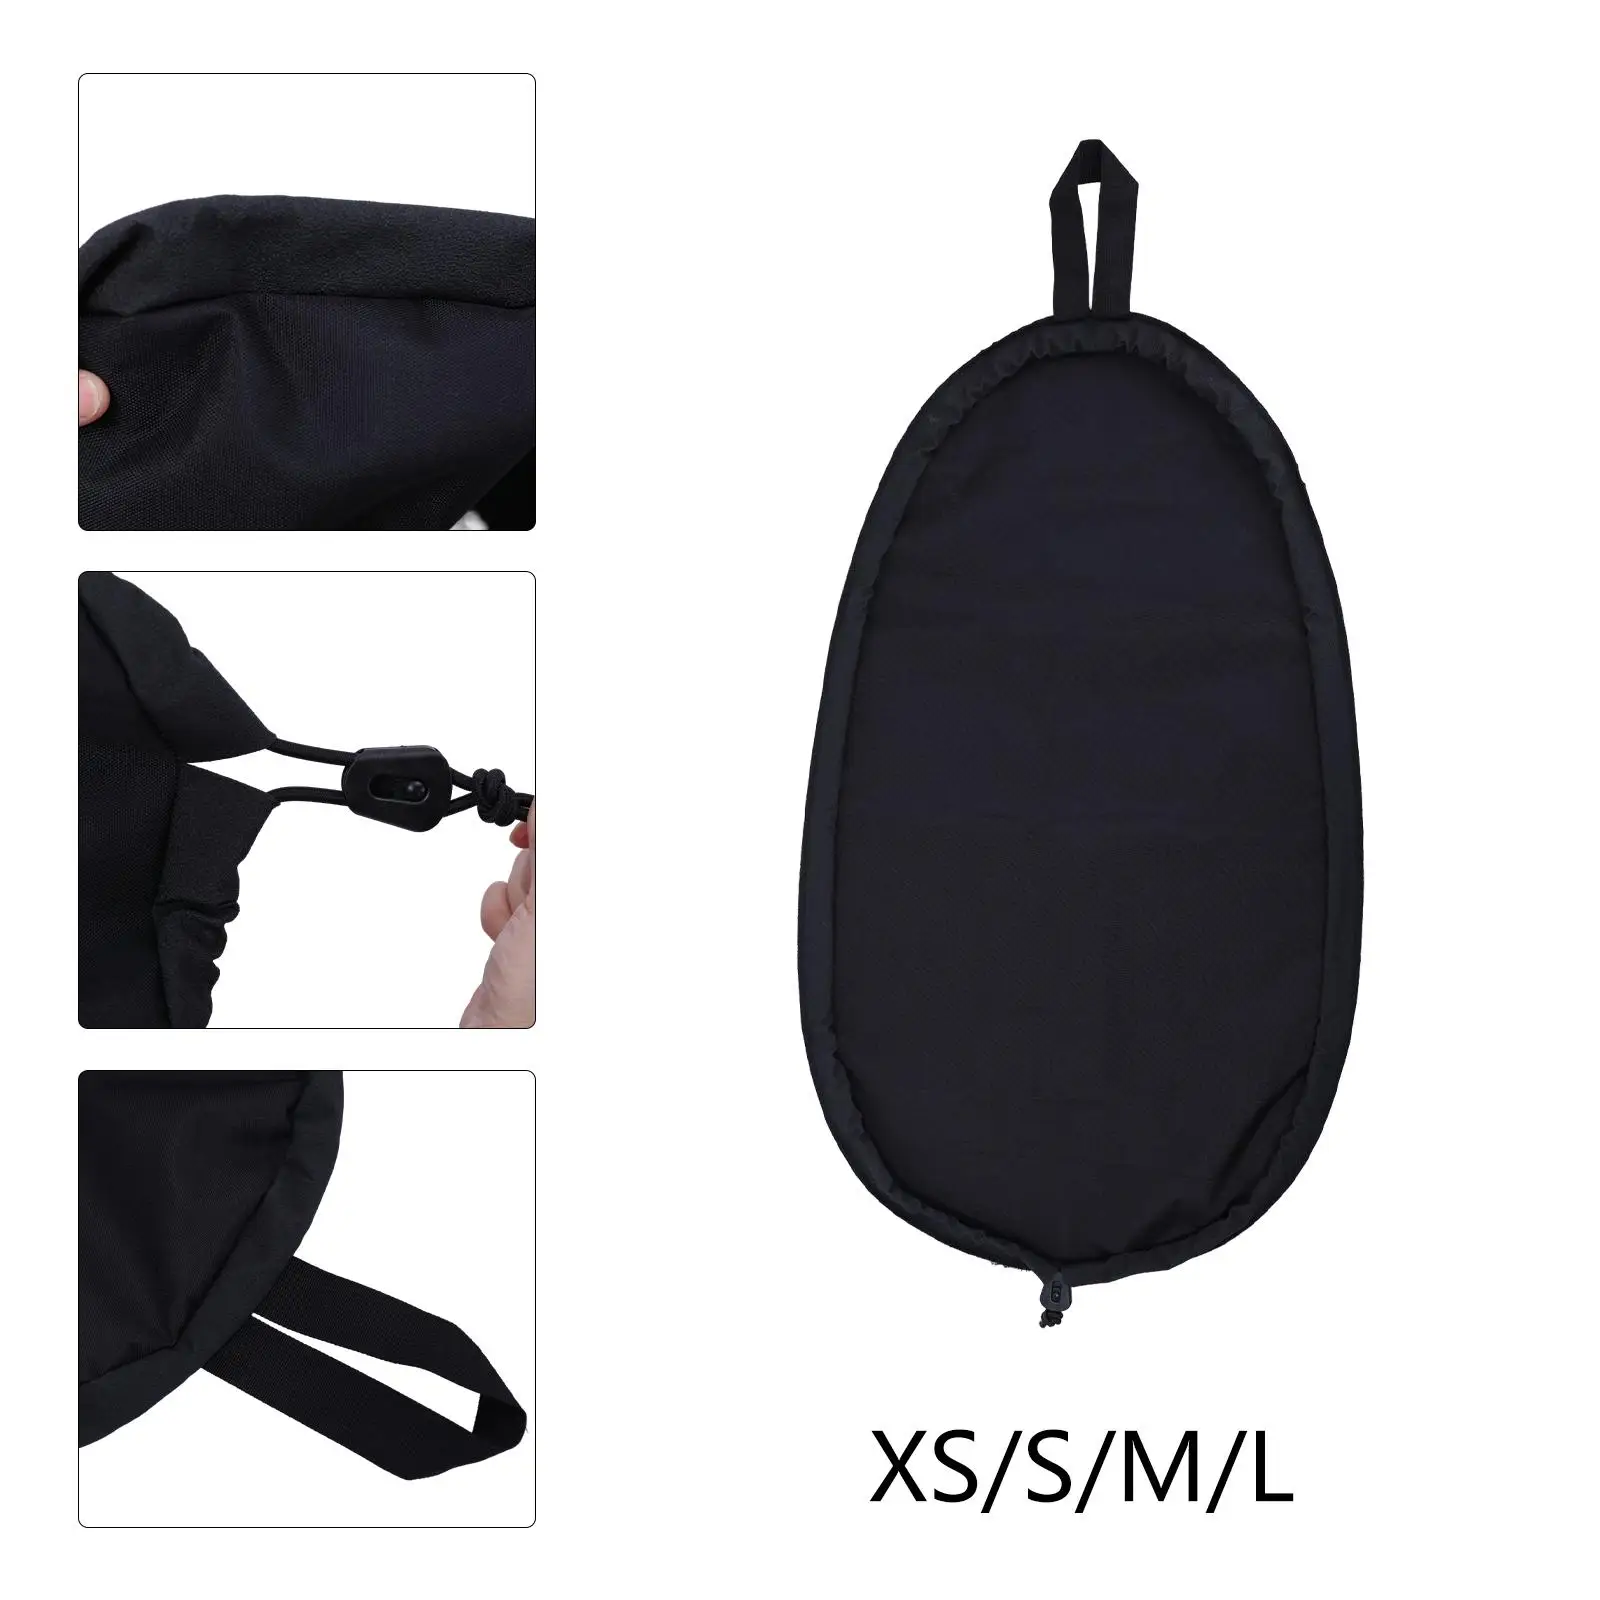 Kayak Cockpit Cover Breathable 600D Oxford Seat Cover for Outdoor Storage Transport